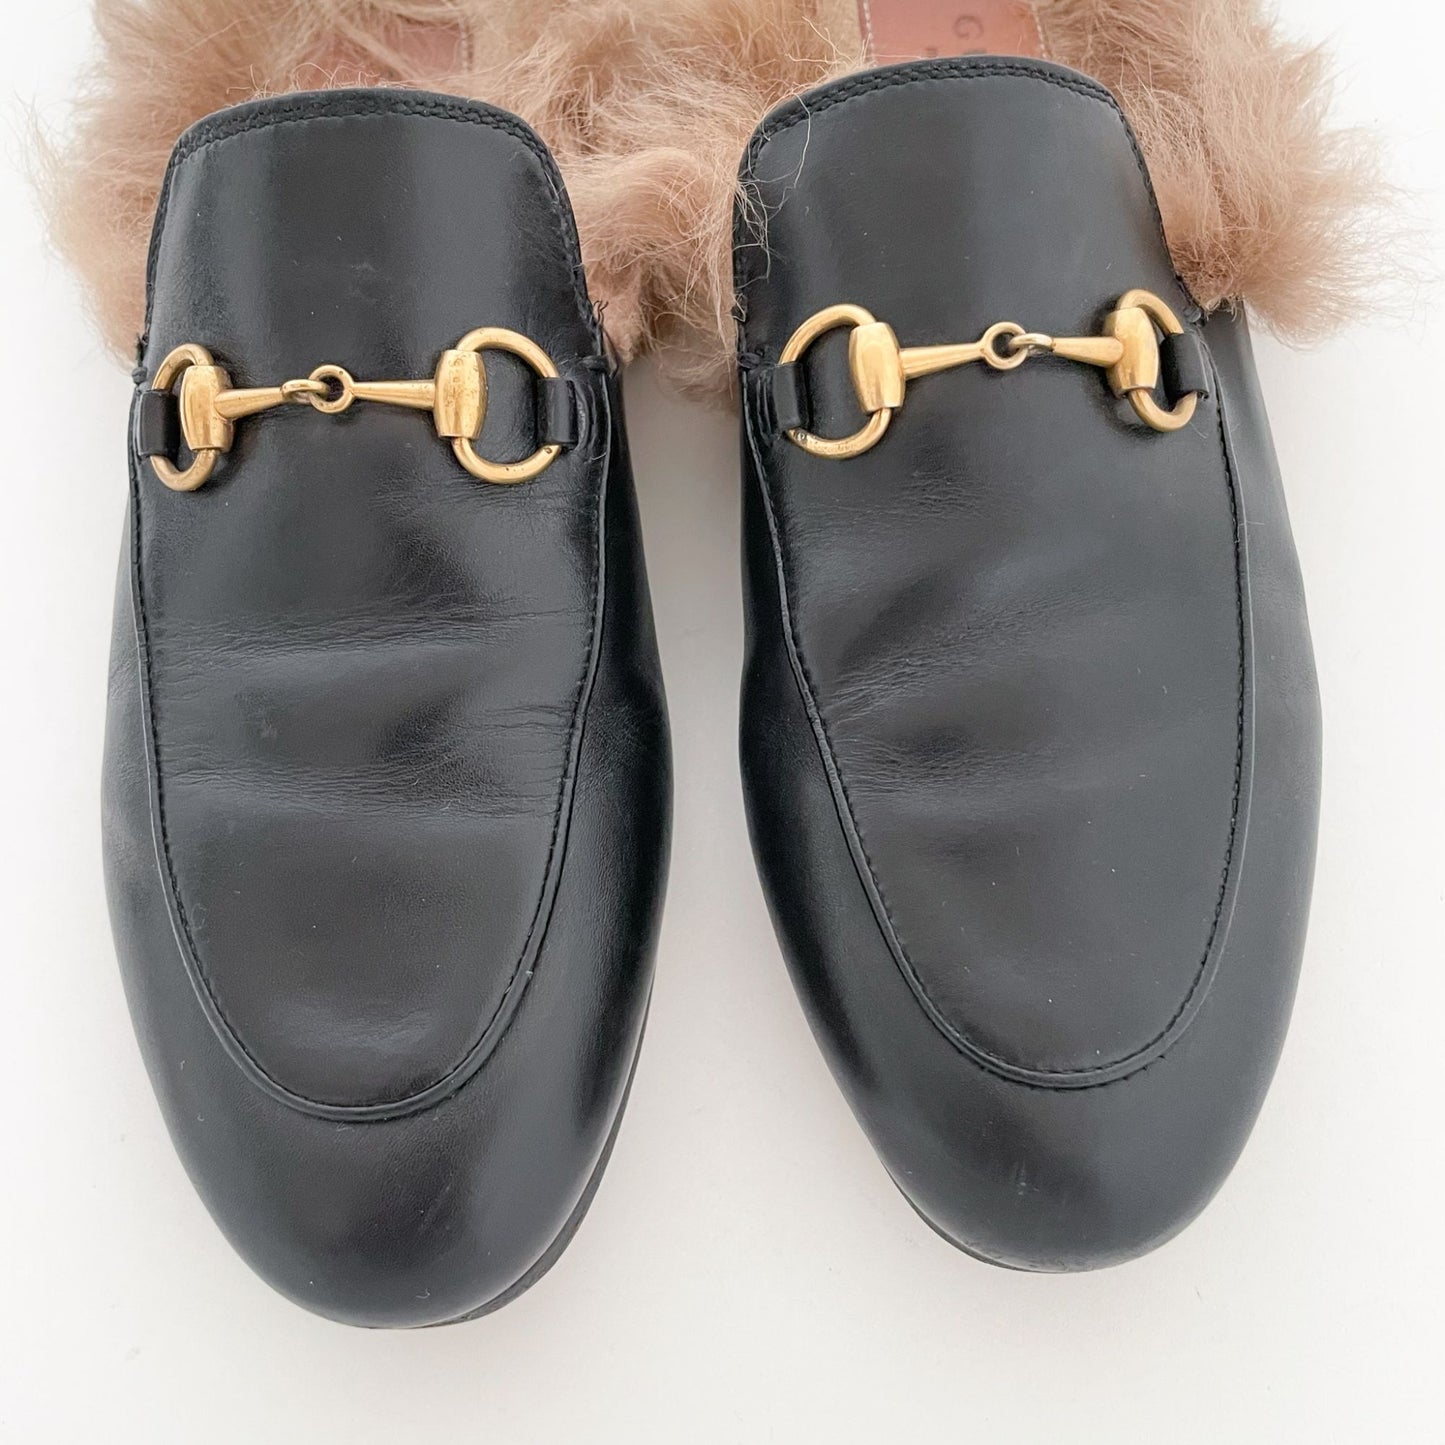 Gucci Princetown Shearling-Lined Leather Slipper in Black Size 36